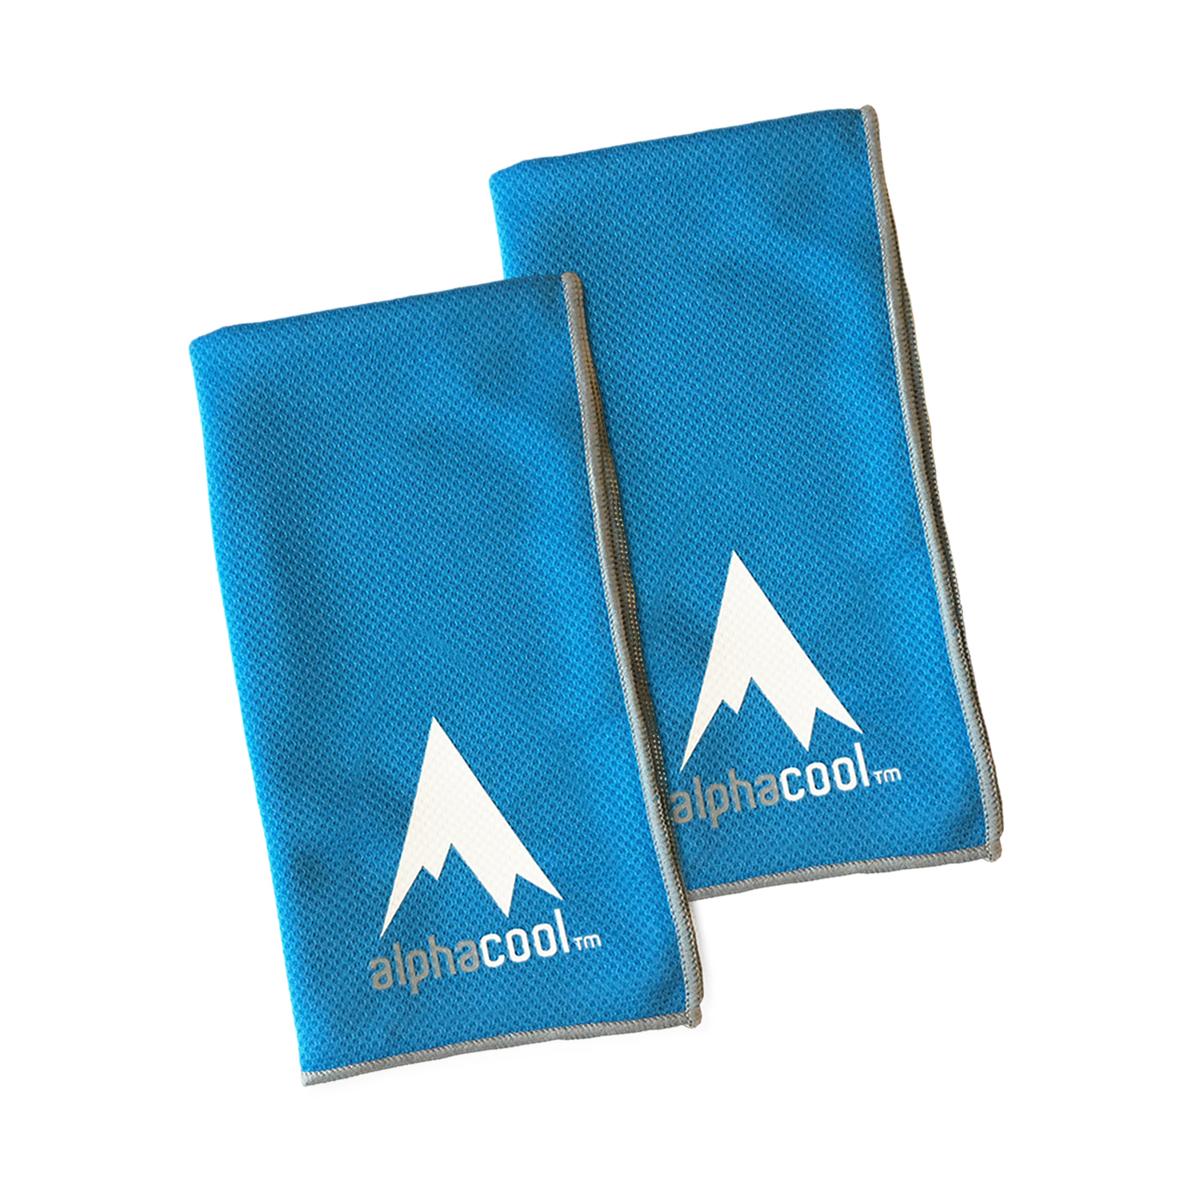 AlphaCool Mesh Instant Cooling Towel (2-Pack) - Cooling